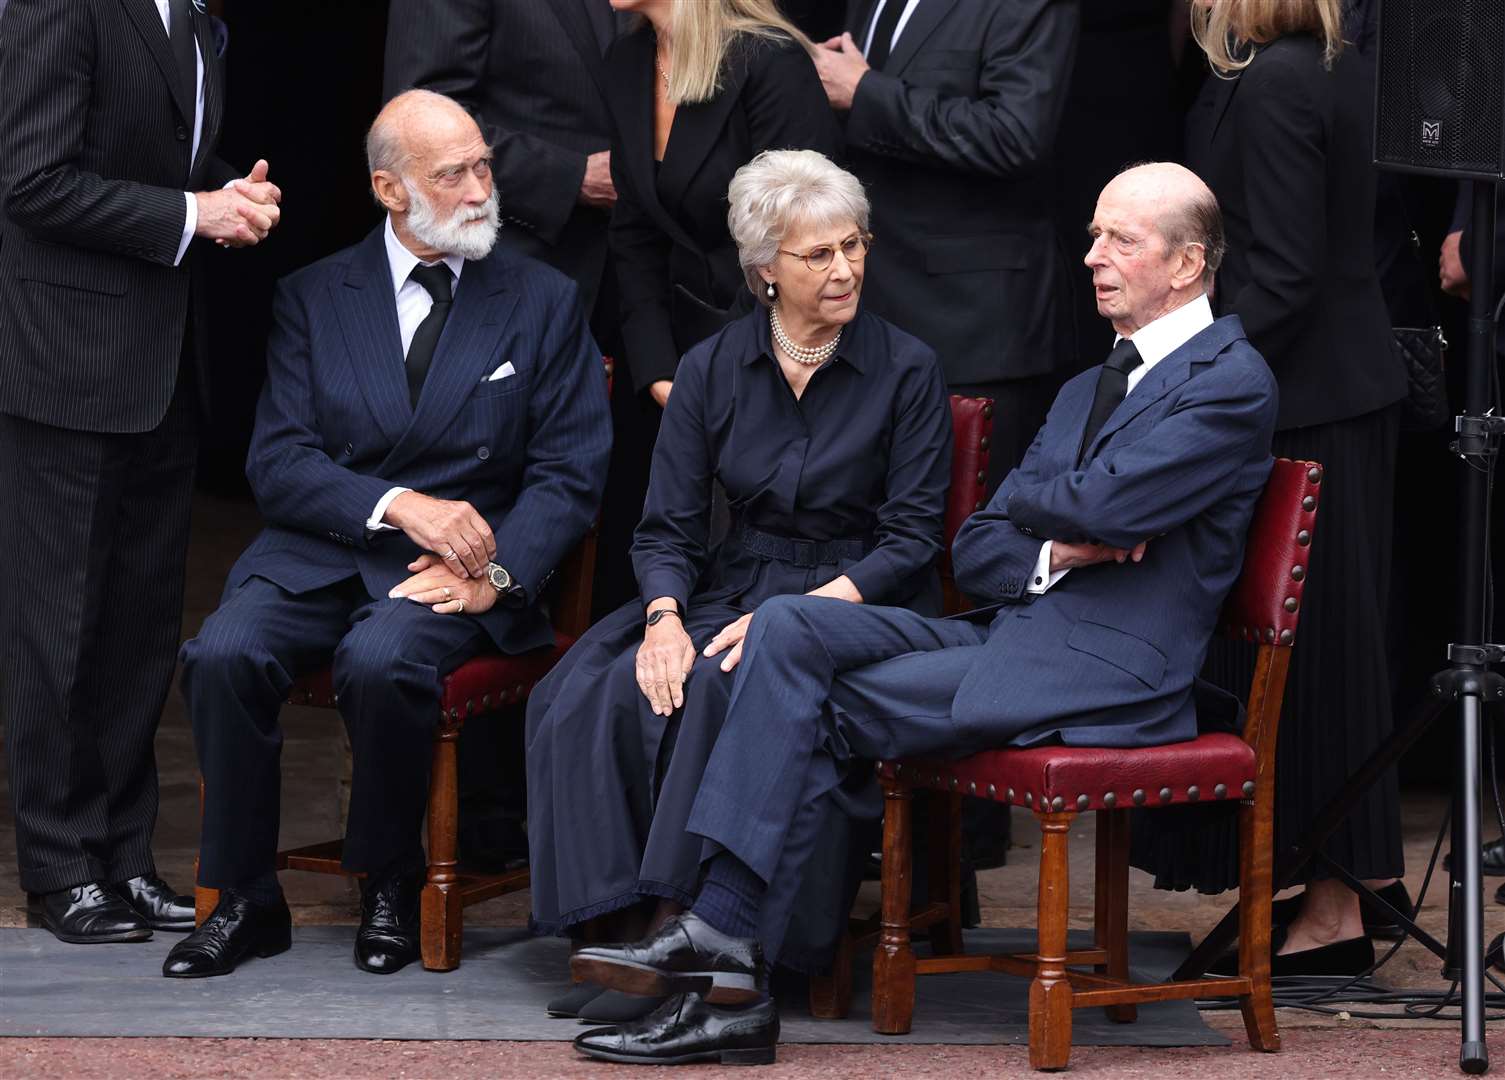 Prince Michael of Kent, the Duchess of Gloucester and the Duke of Kent sit together as King Charles III is proclaimed King (Richard Heathcote/PA)